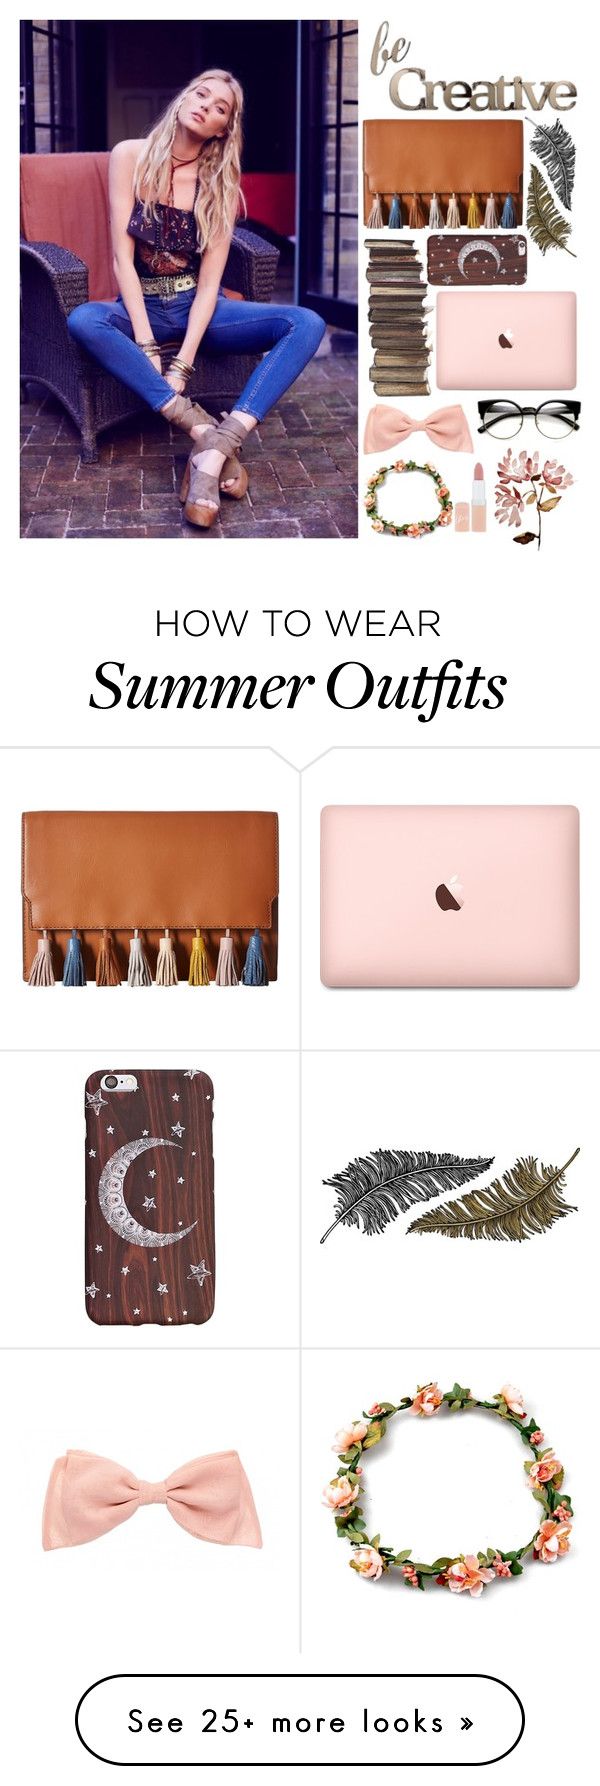 "Be creative" by malrocks2003 on Polyvore featuring Rebecca Minkoff, L...